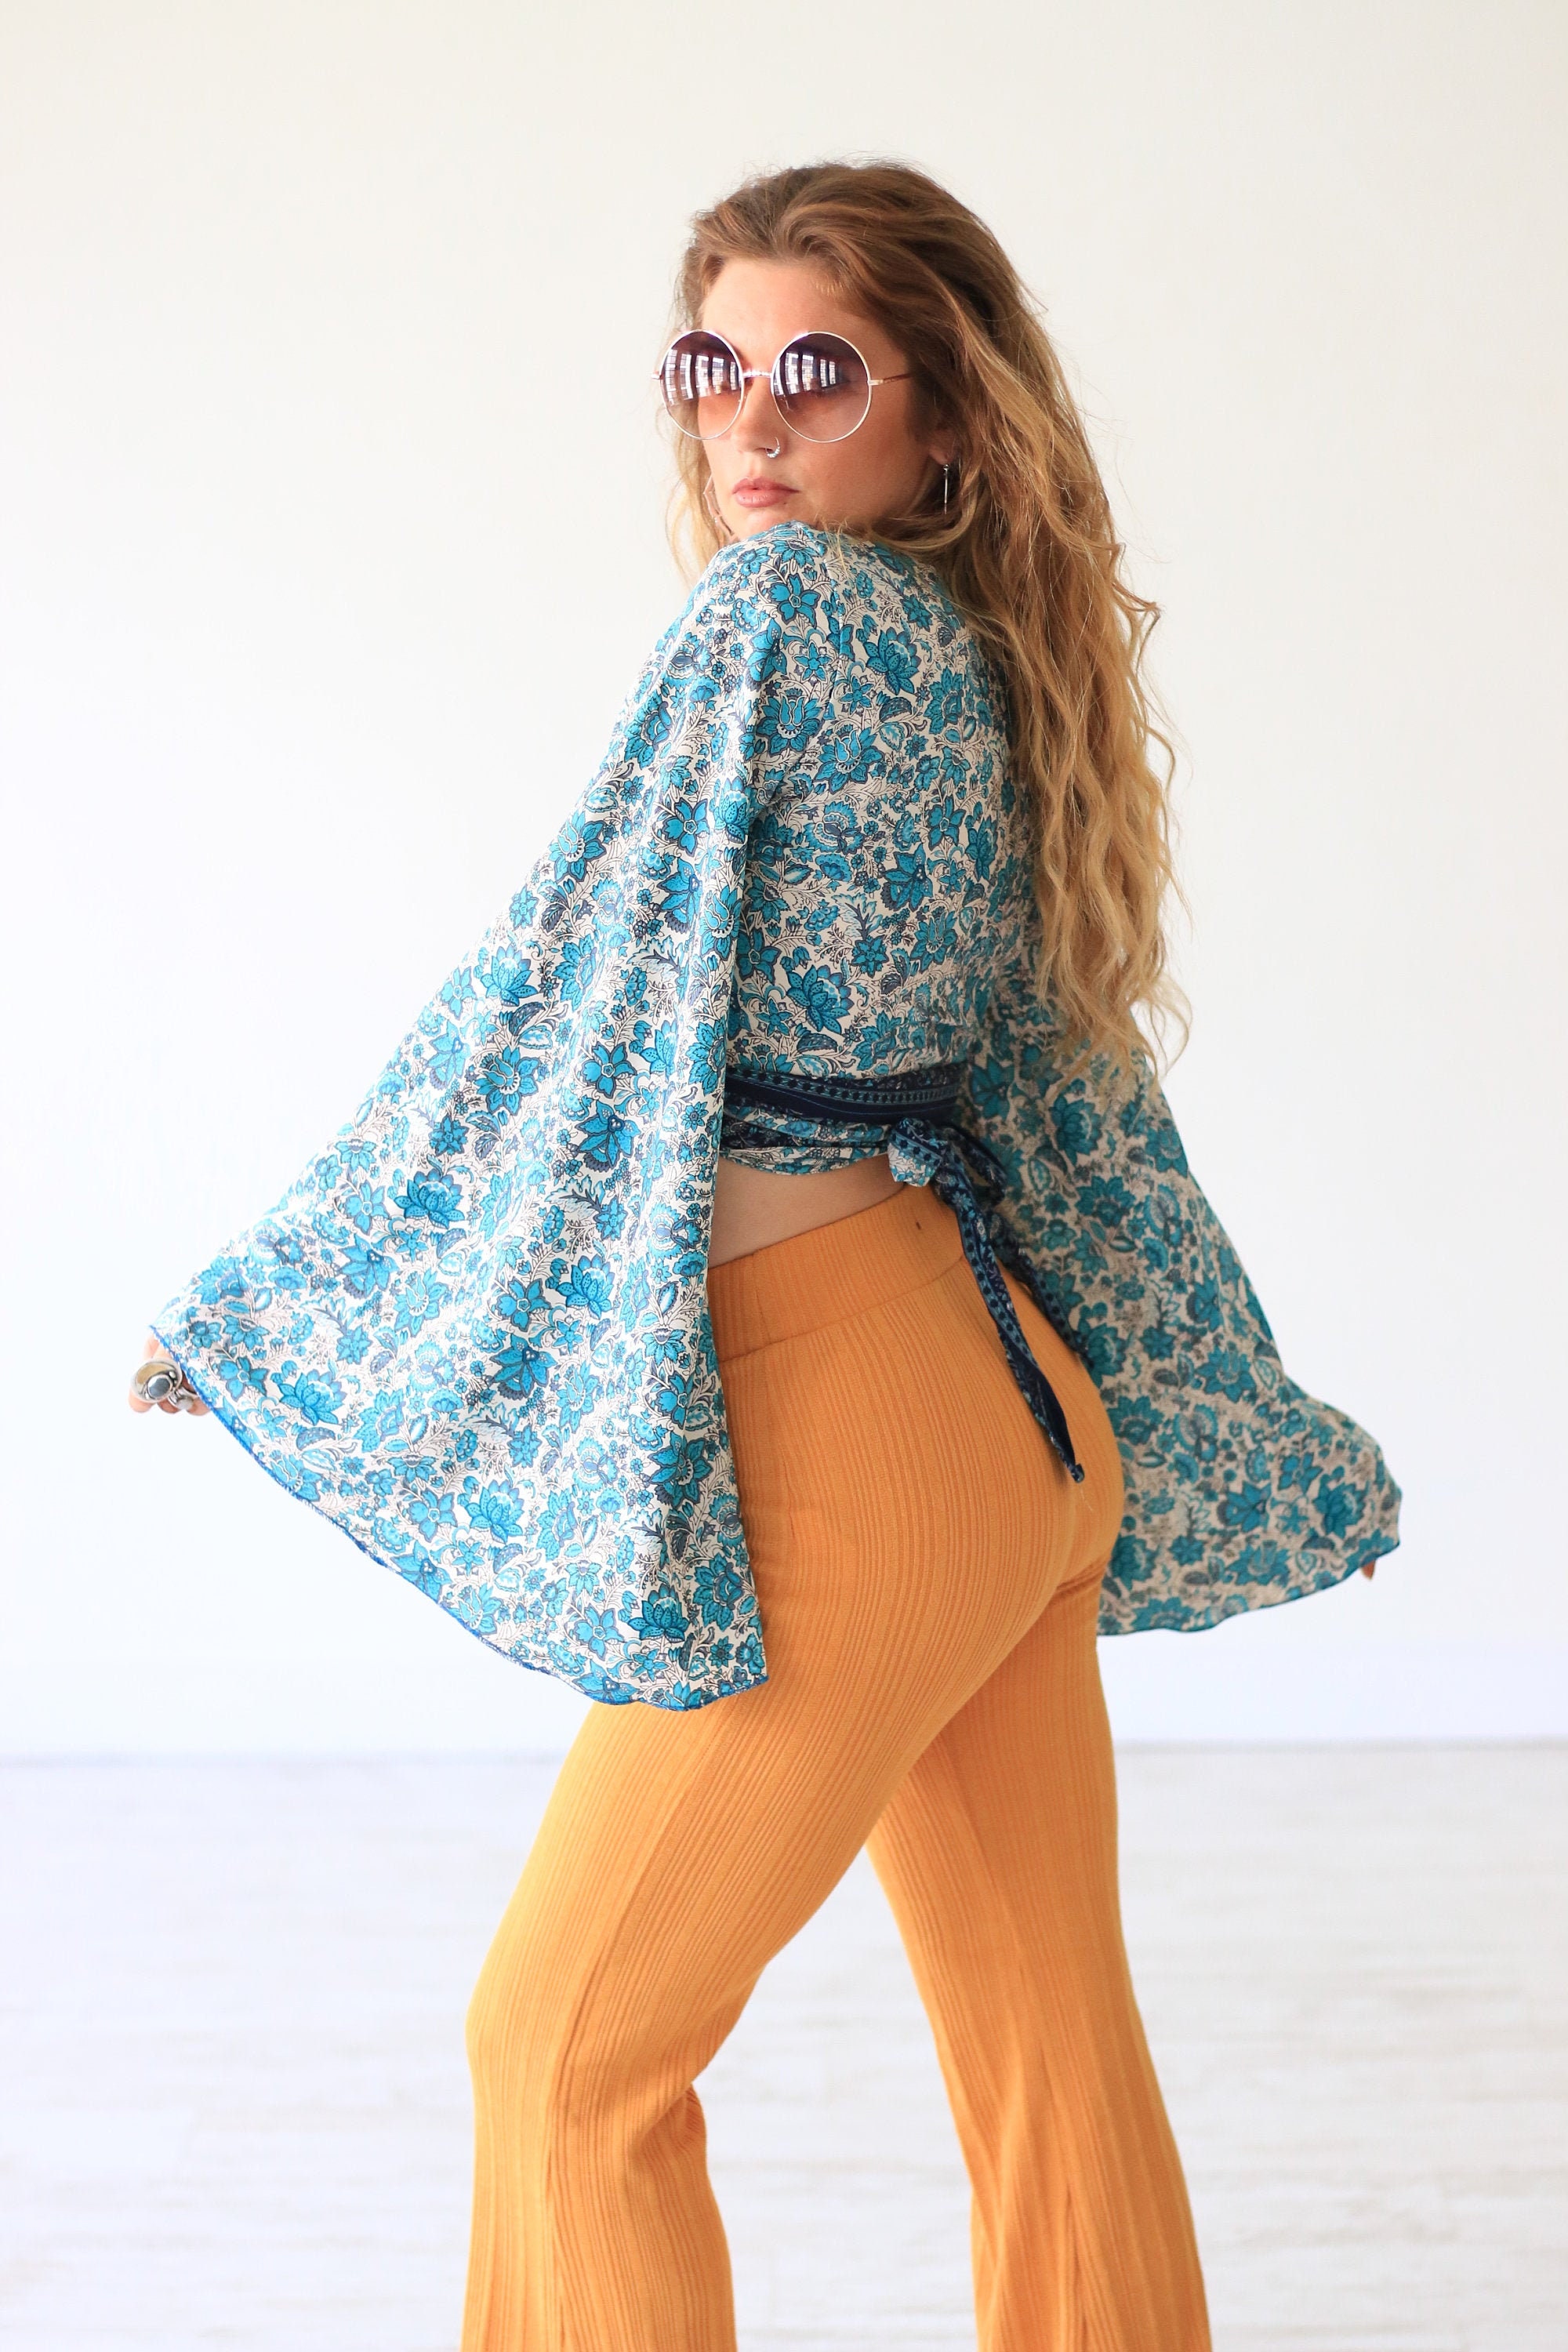 FLORAL BELL SLEEVE - Crop Tie top - Kimono - Vintage Silk - Bohemian -  Retro - 70s - 60'S - Recycled - Free size Indian top - Paisley top